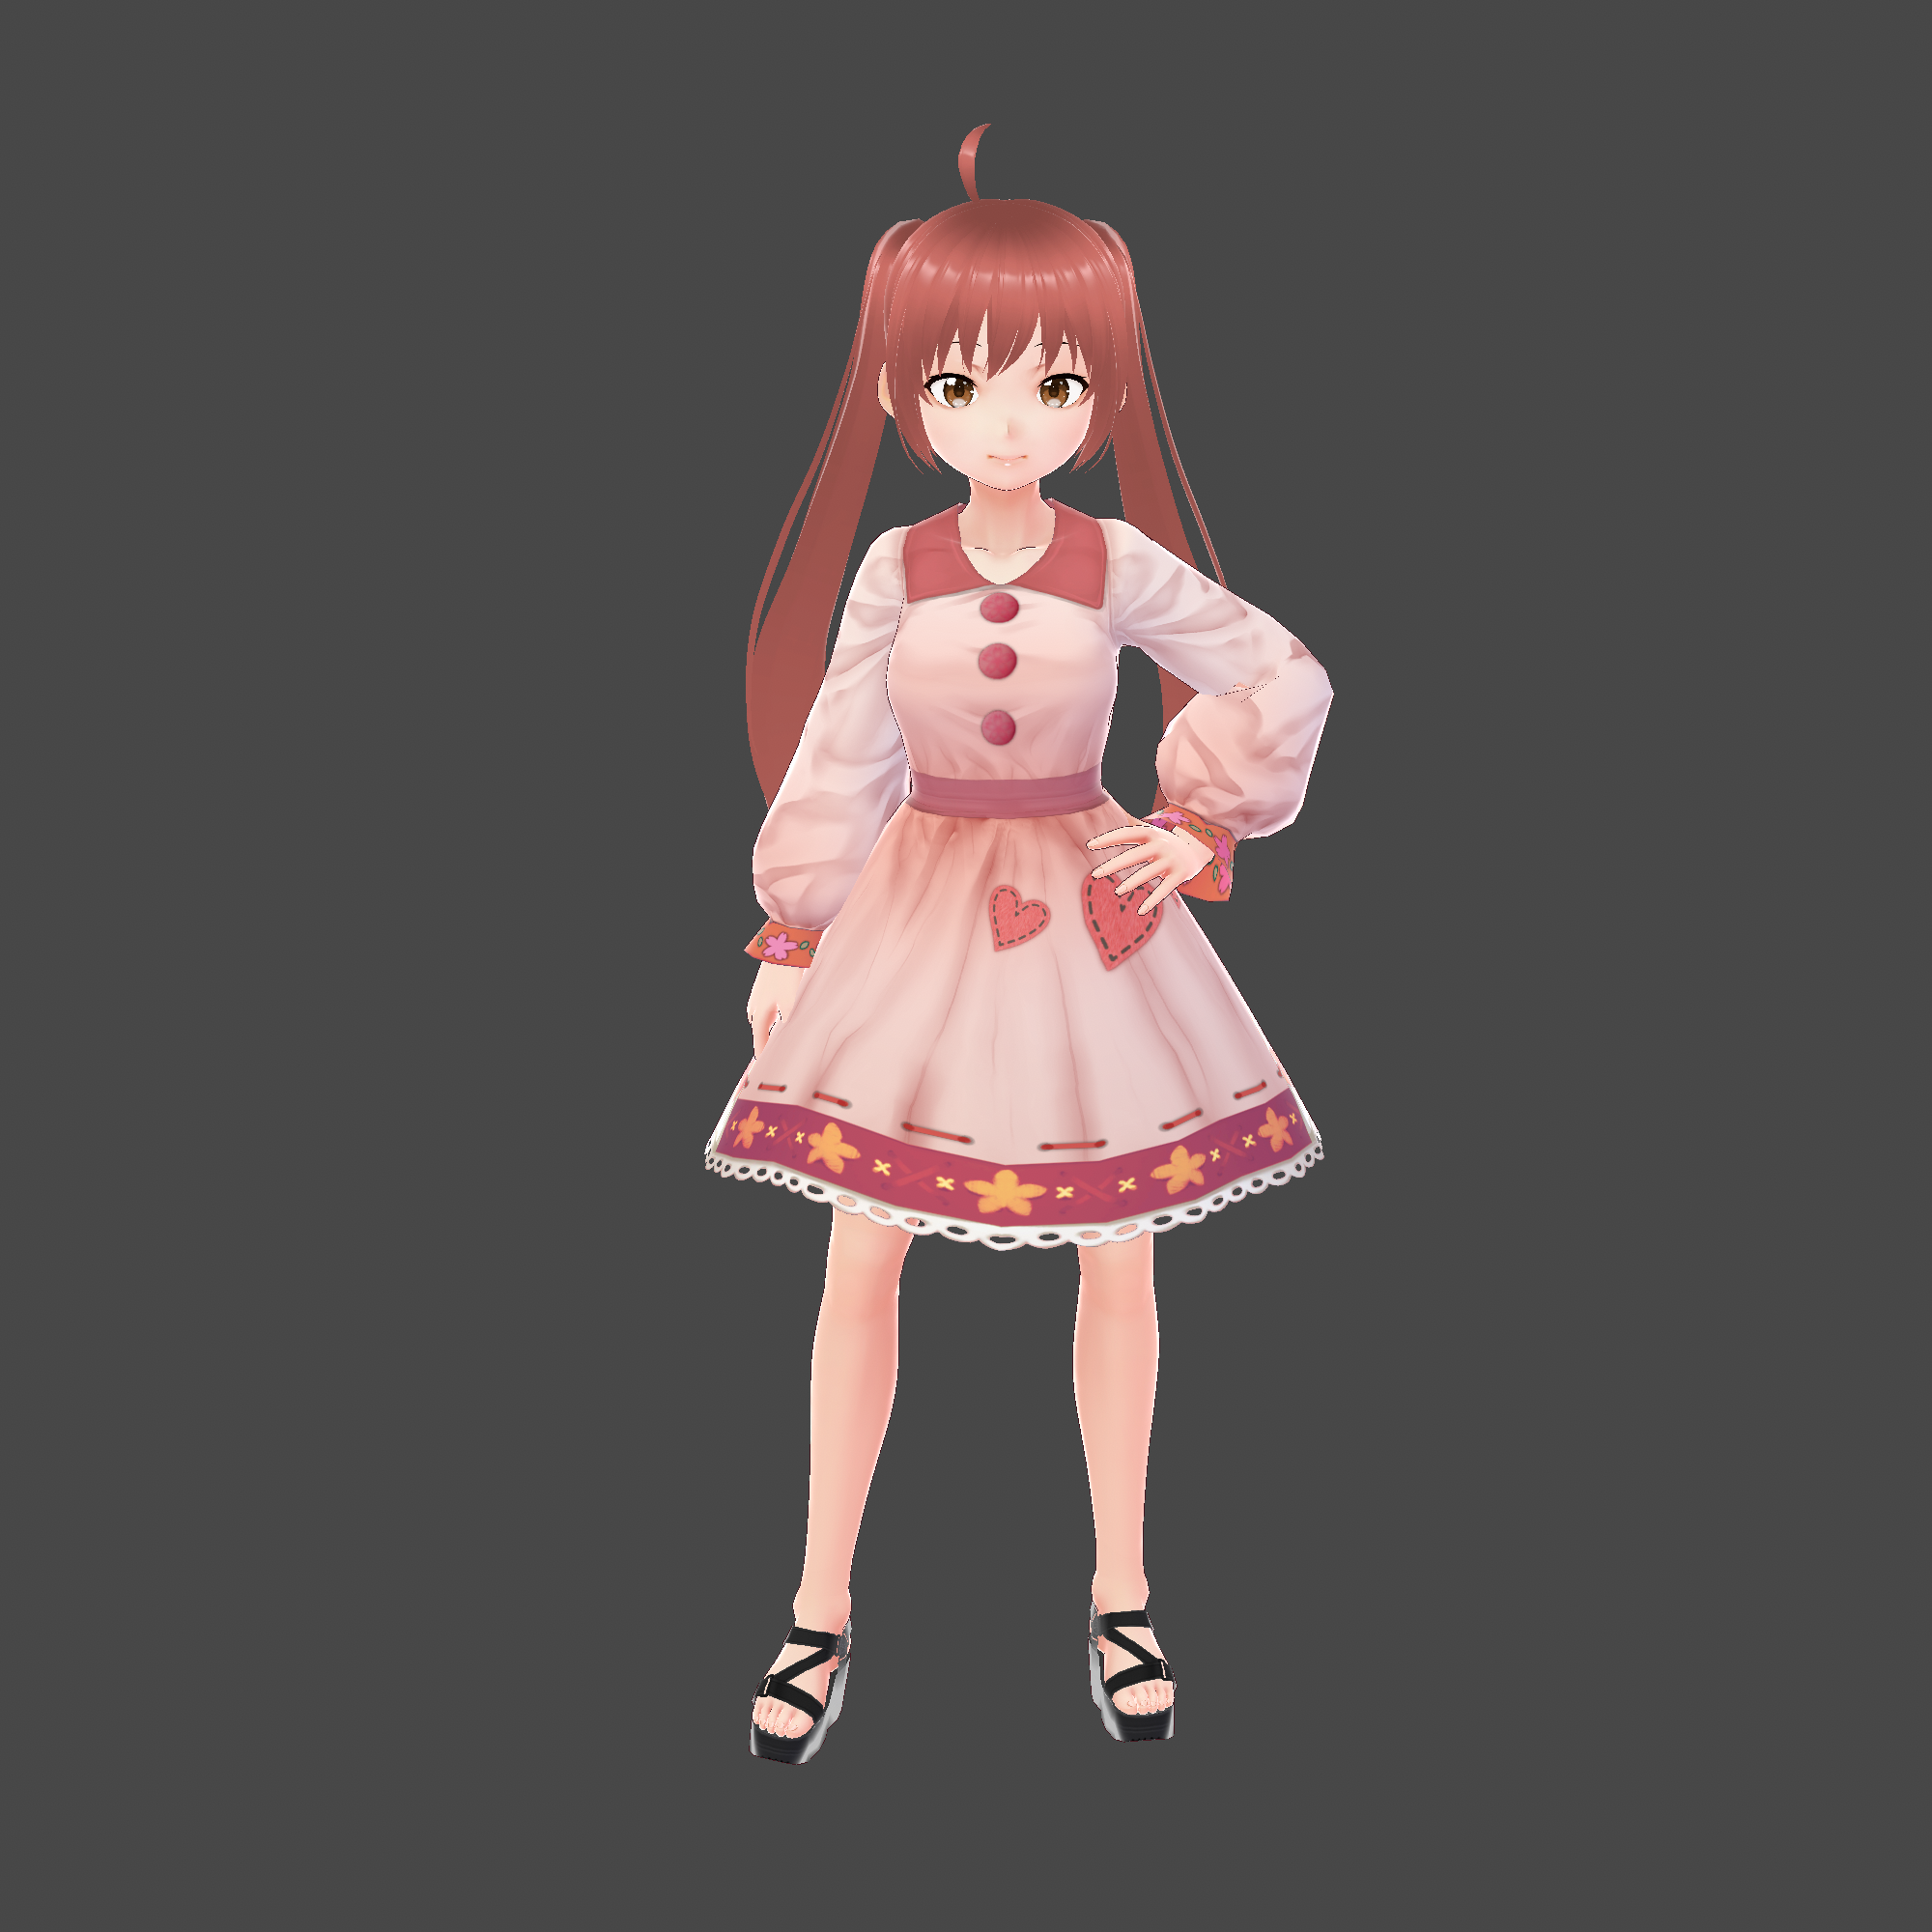 Blender  Anime Character Modeling  COMMISSION by soozyaan on DeviantArt